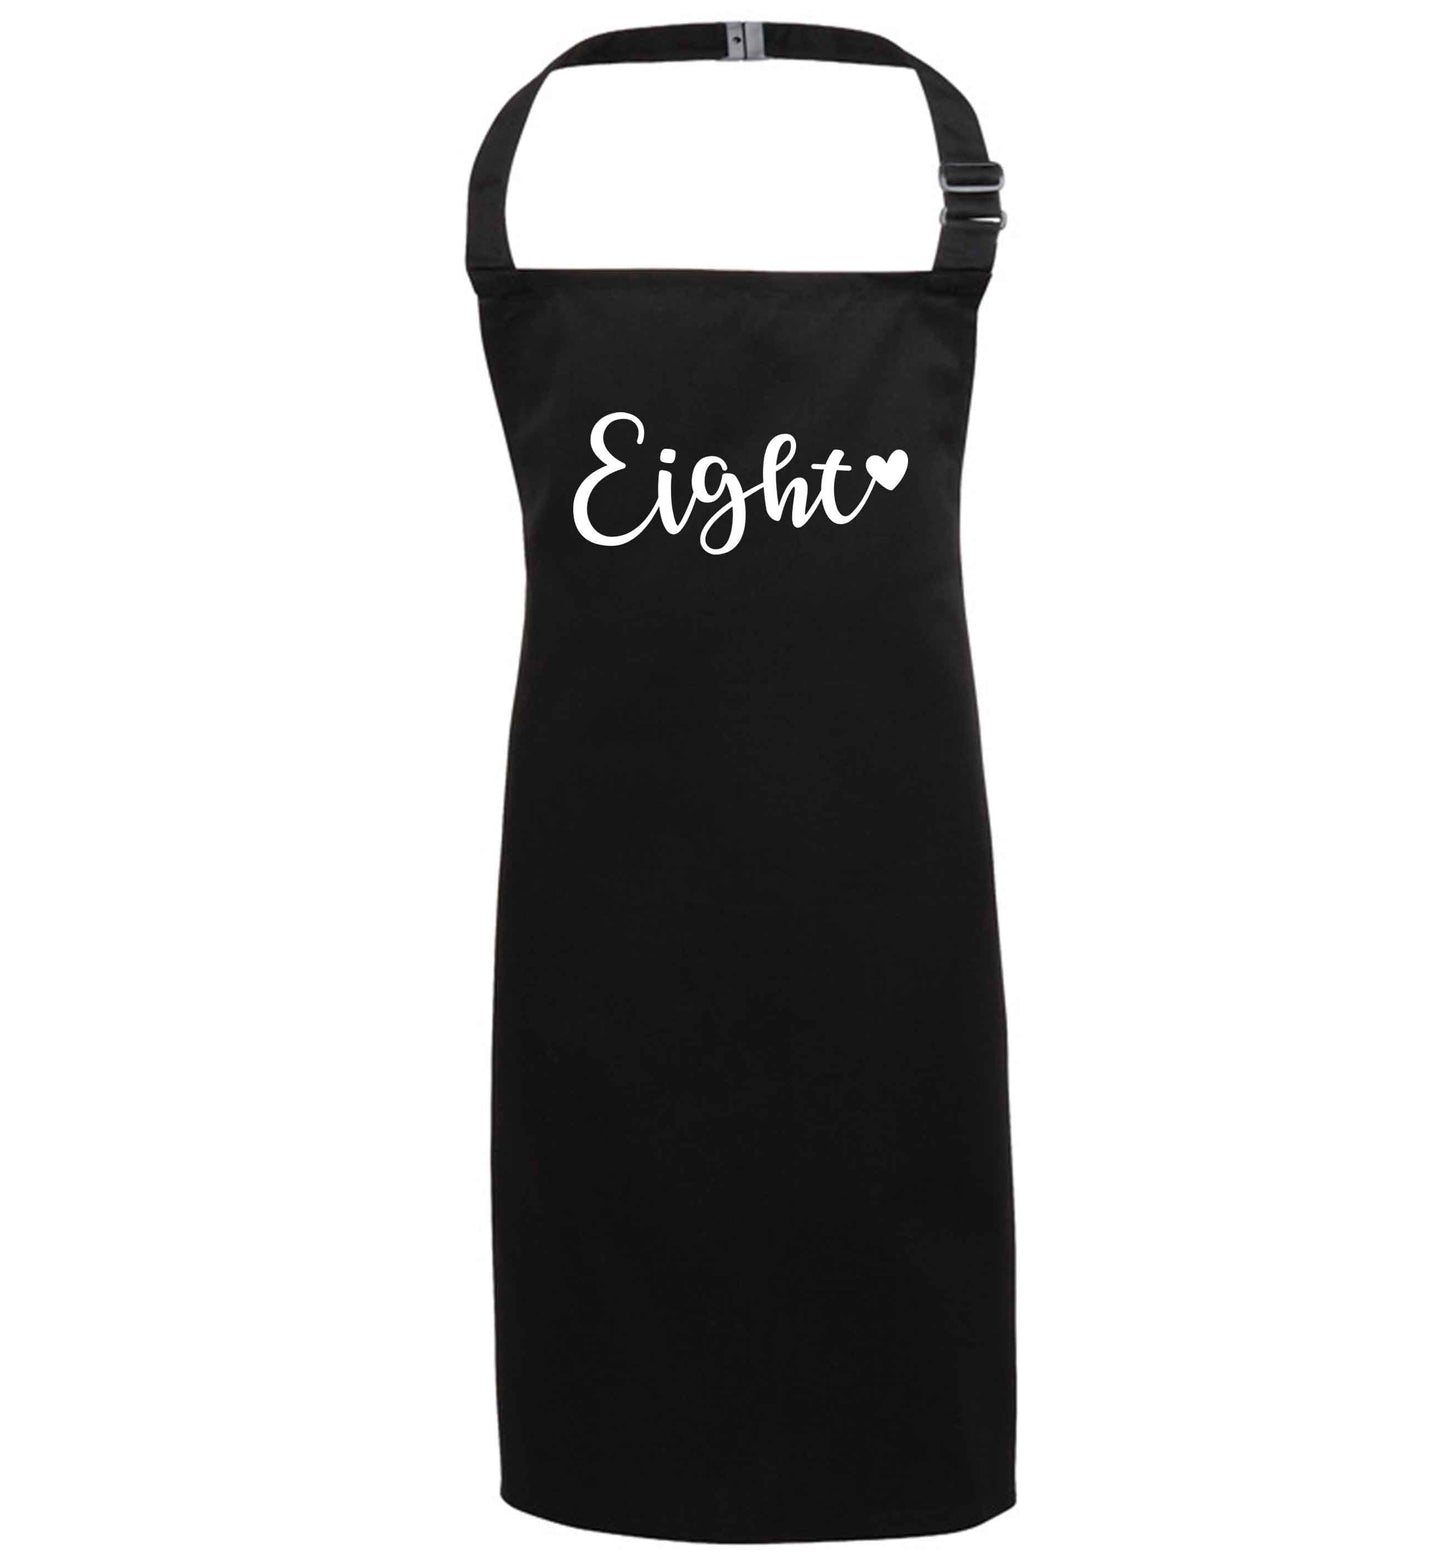 Eight and heart black apron 7-10 years